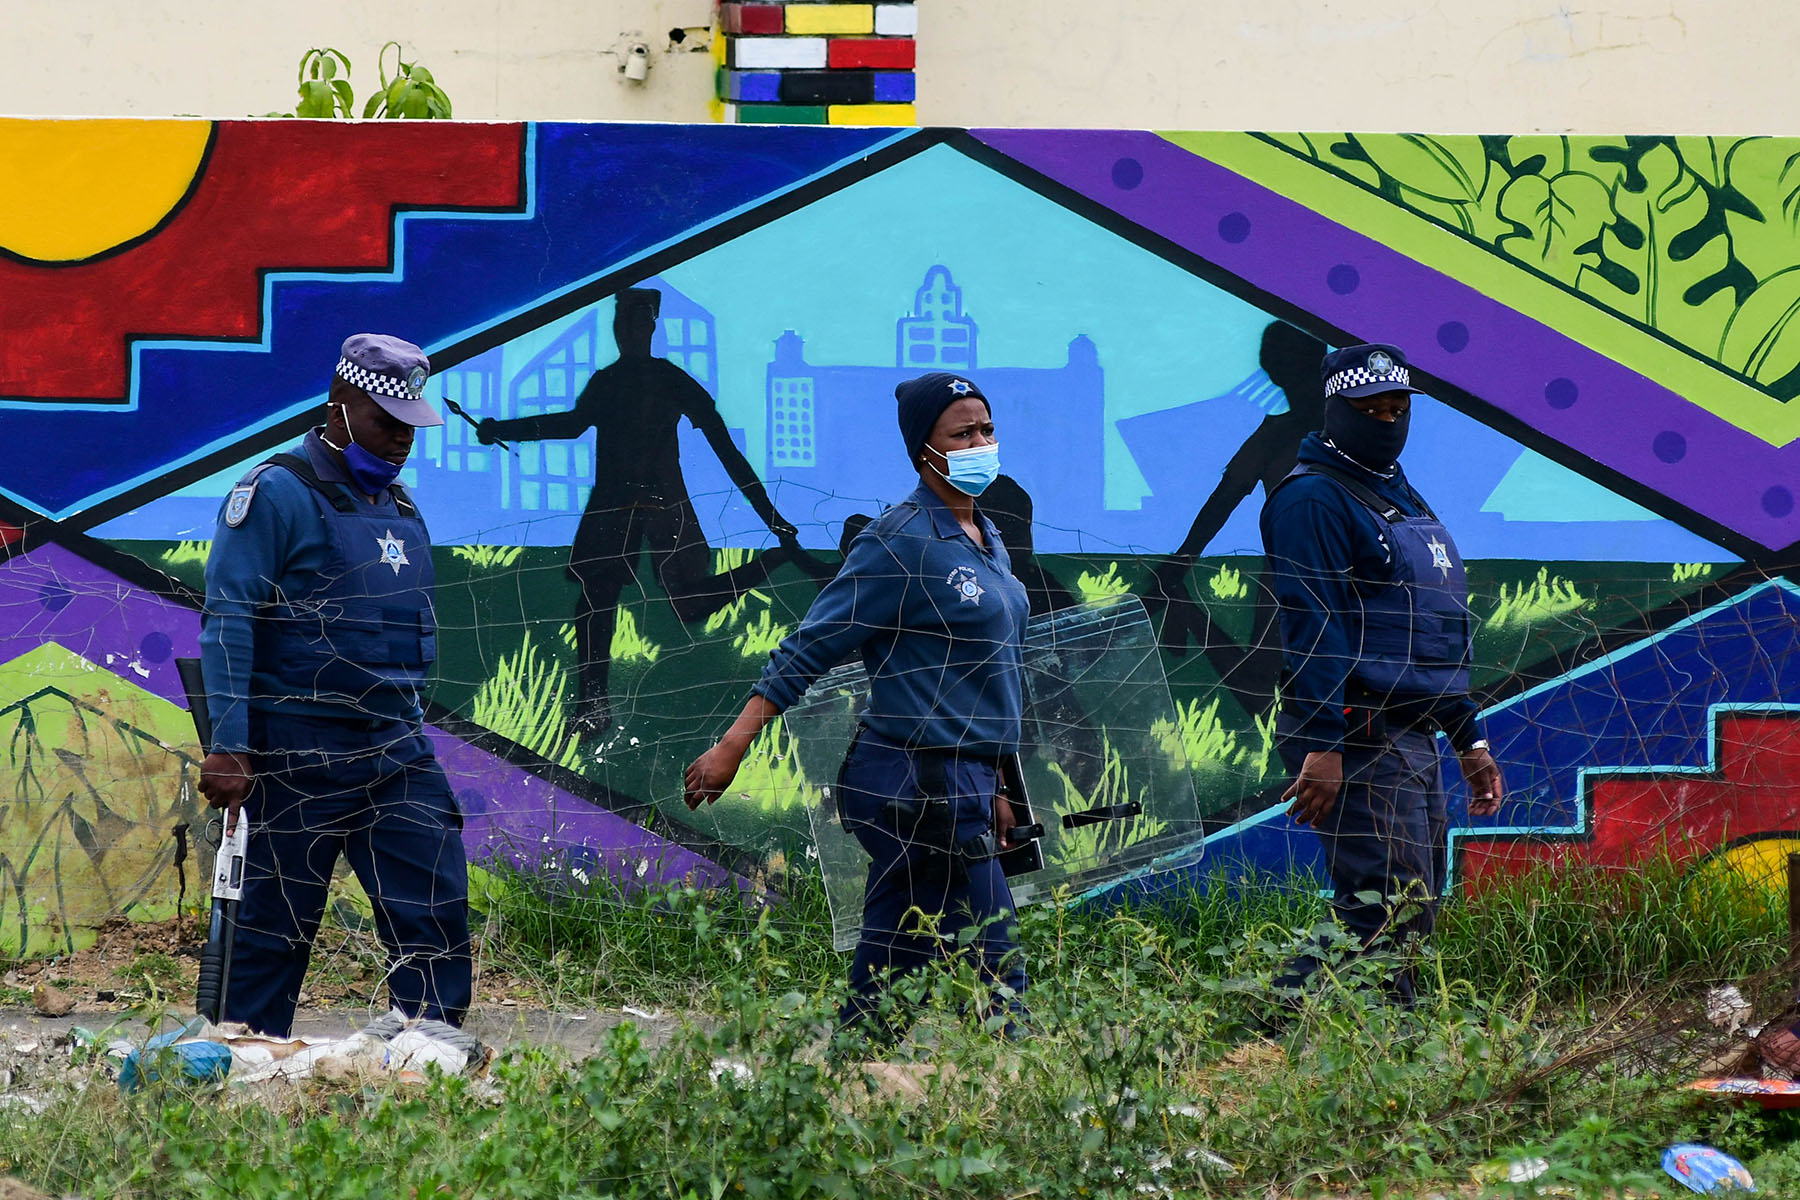 South African police officers walk past a mural on a wall while investigating a crime